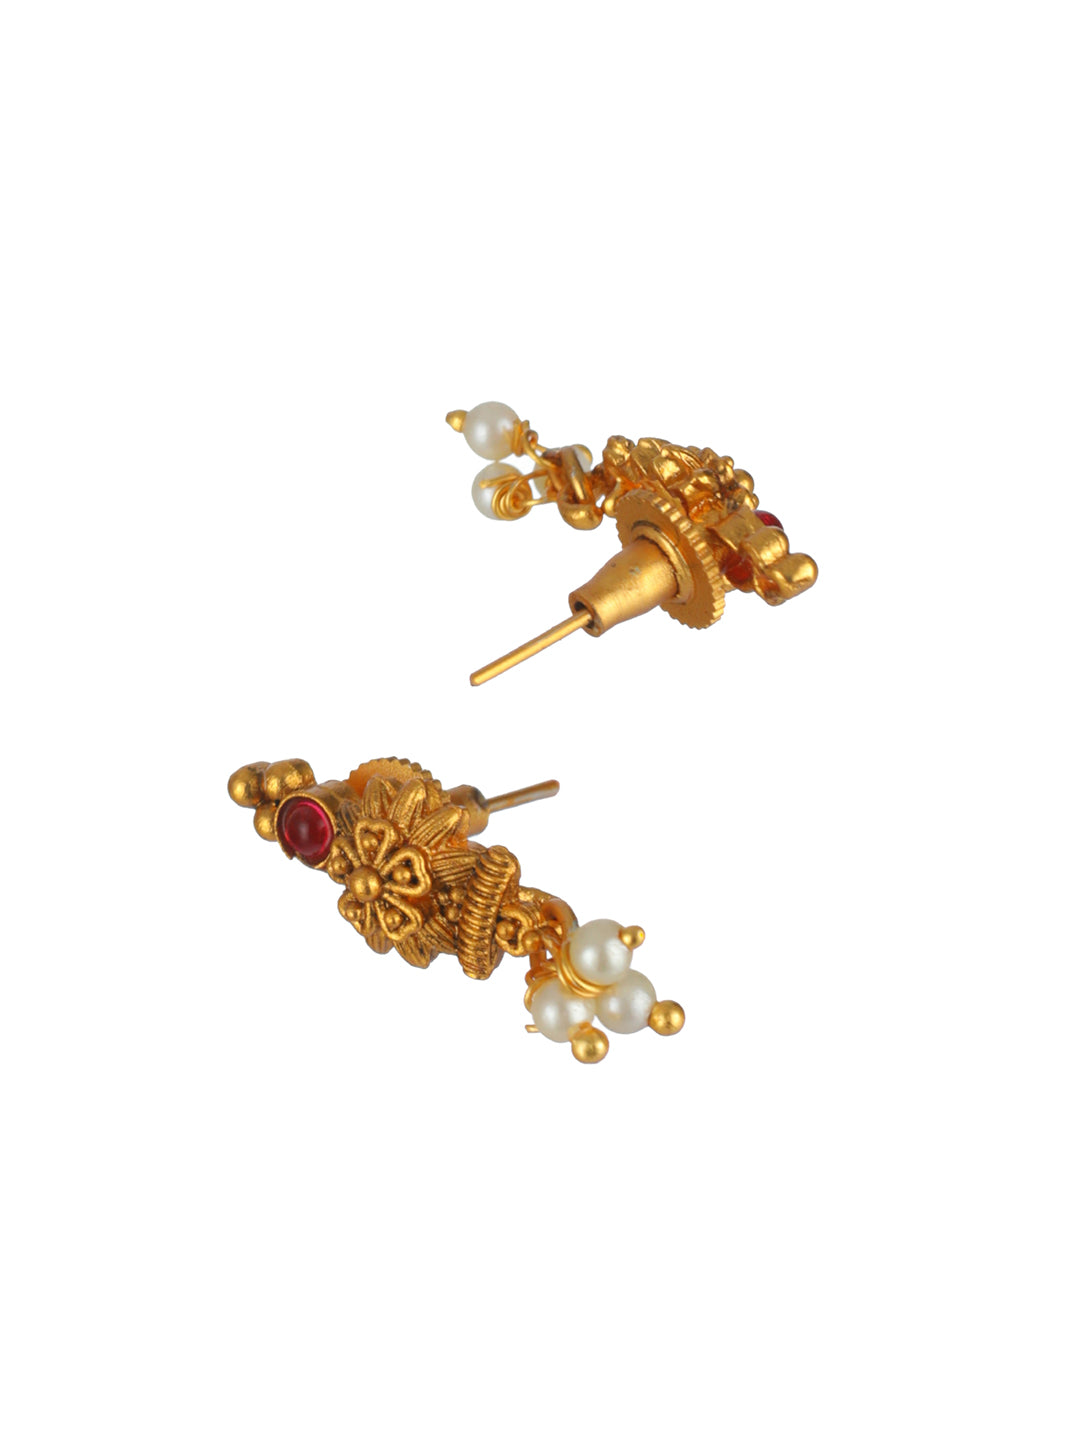 Priyaasi Traditional Floral Kemp Stone Gold-Plated Jewellery Set